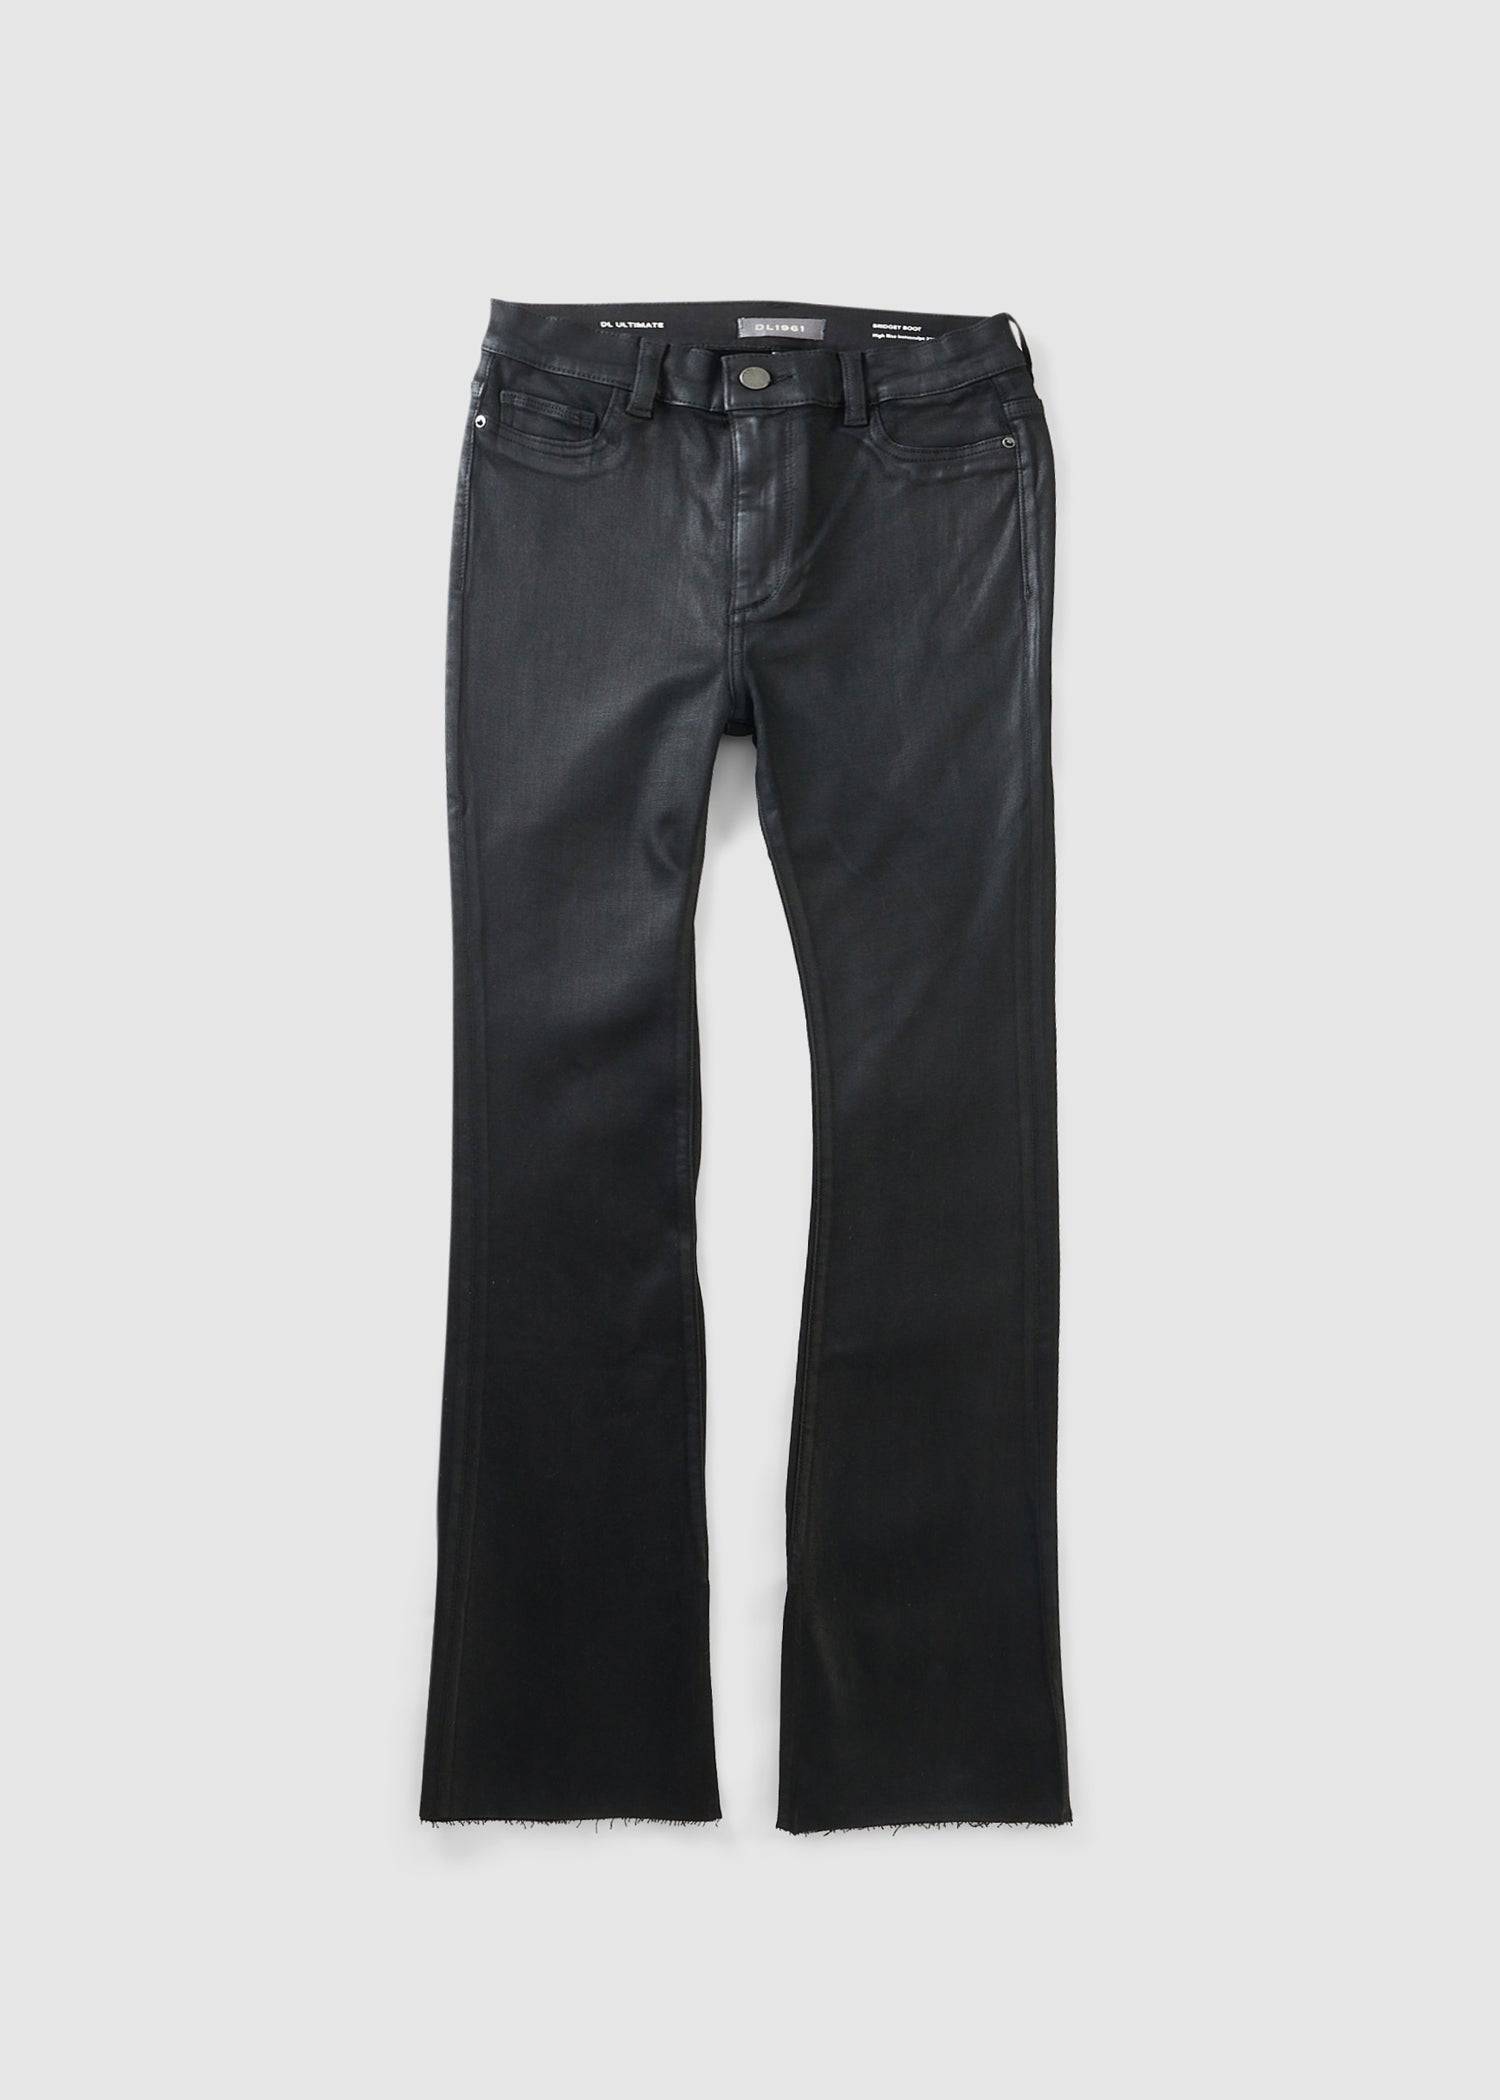 Image of Dl1961 Womens Bridget Boot Ultimate Coated High Rise Instasculpt 33' Jeans In Black Coated